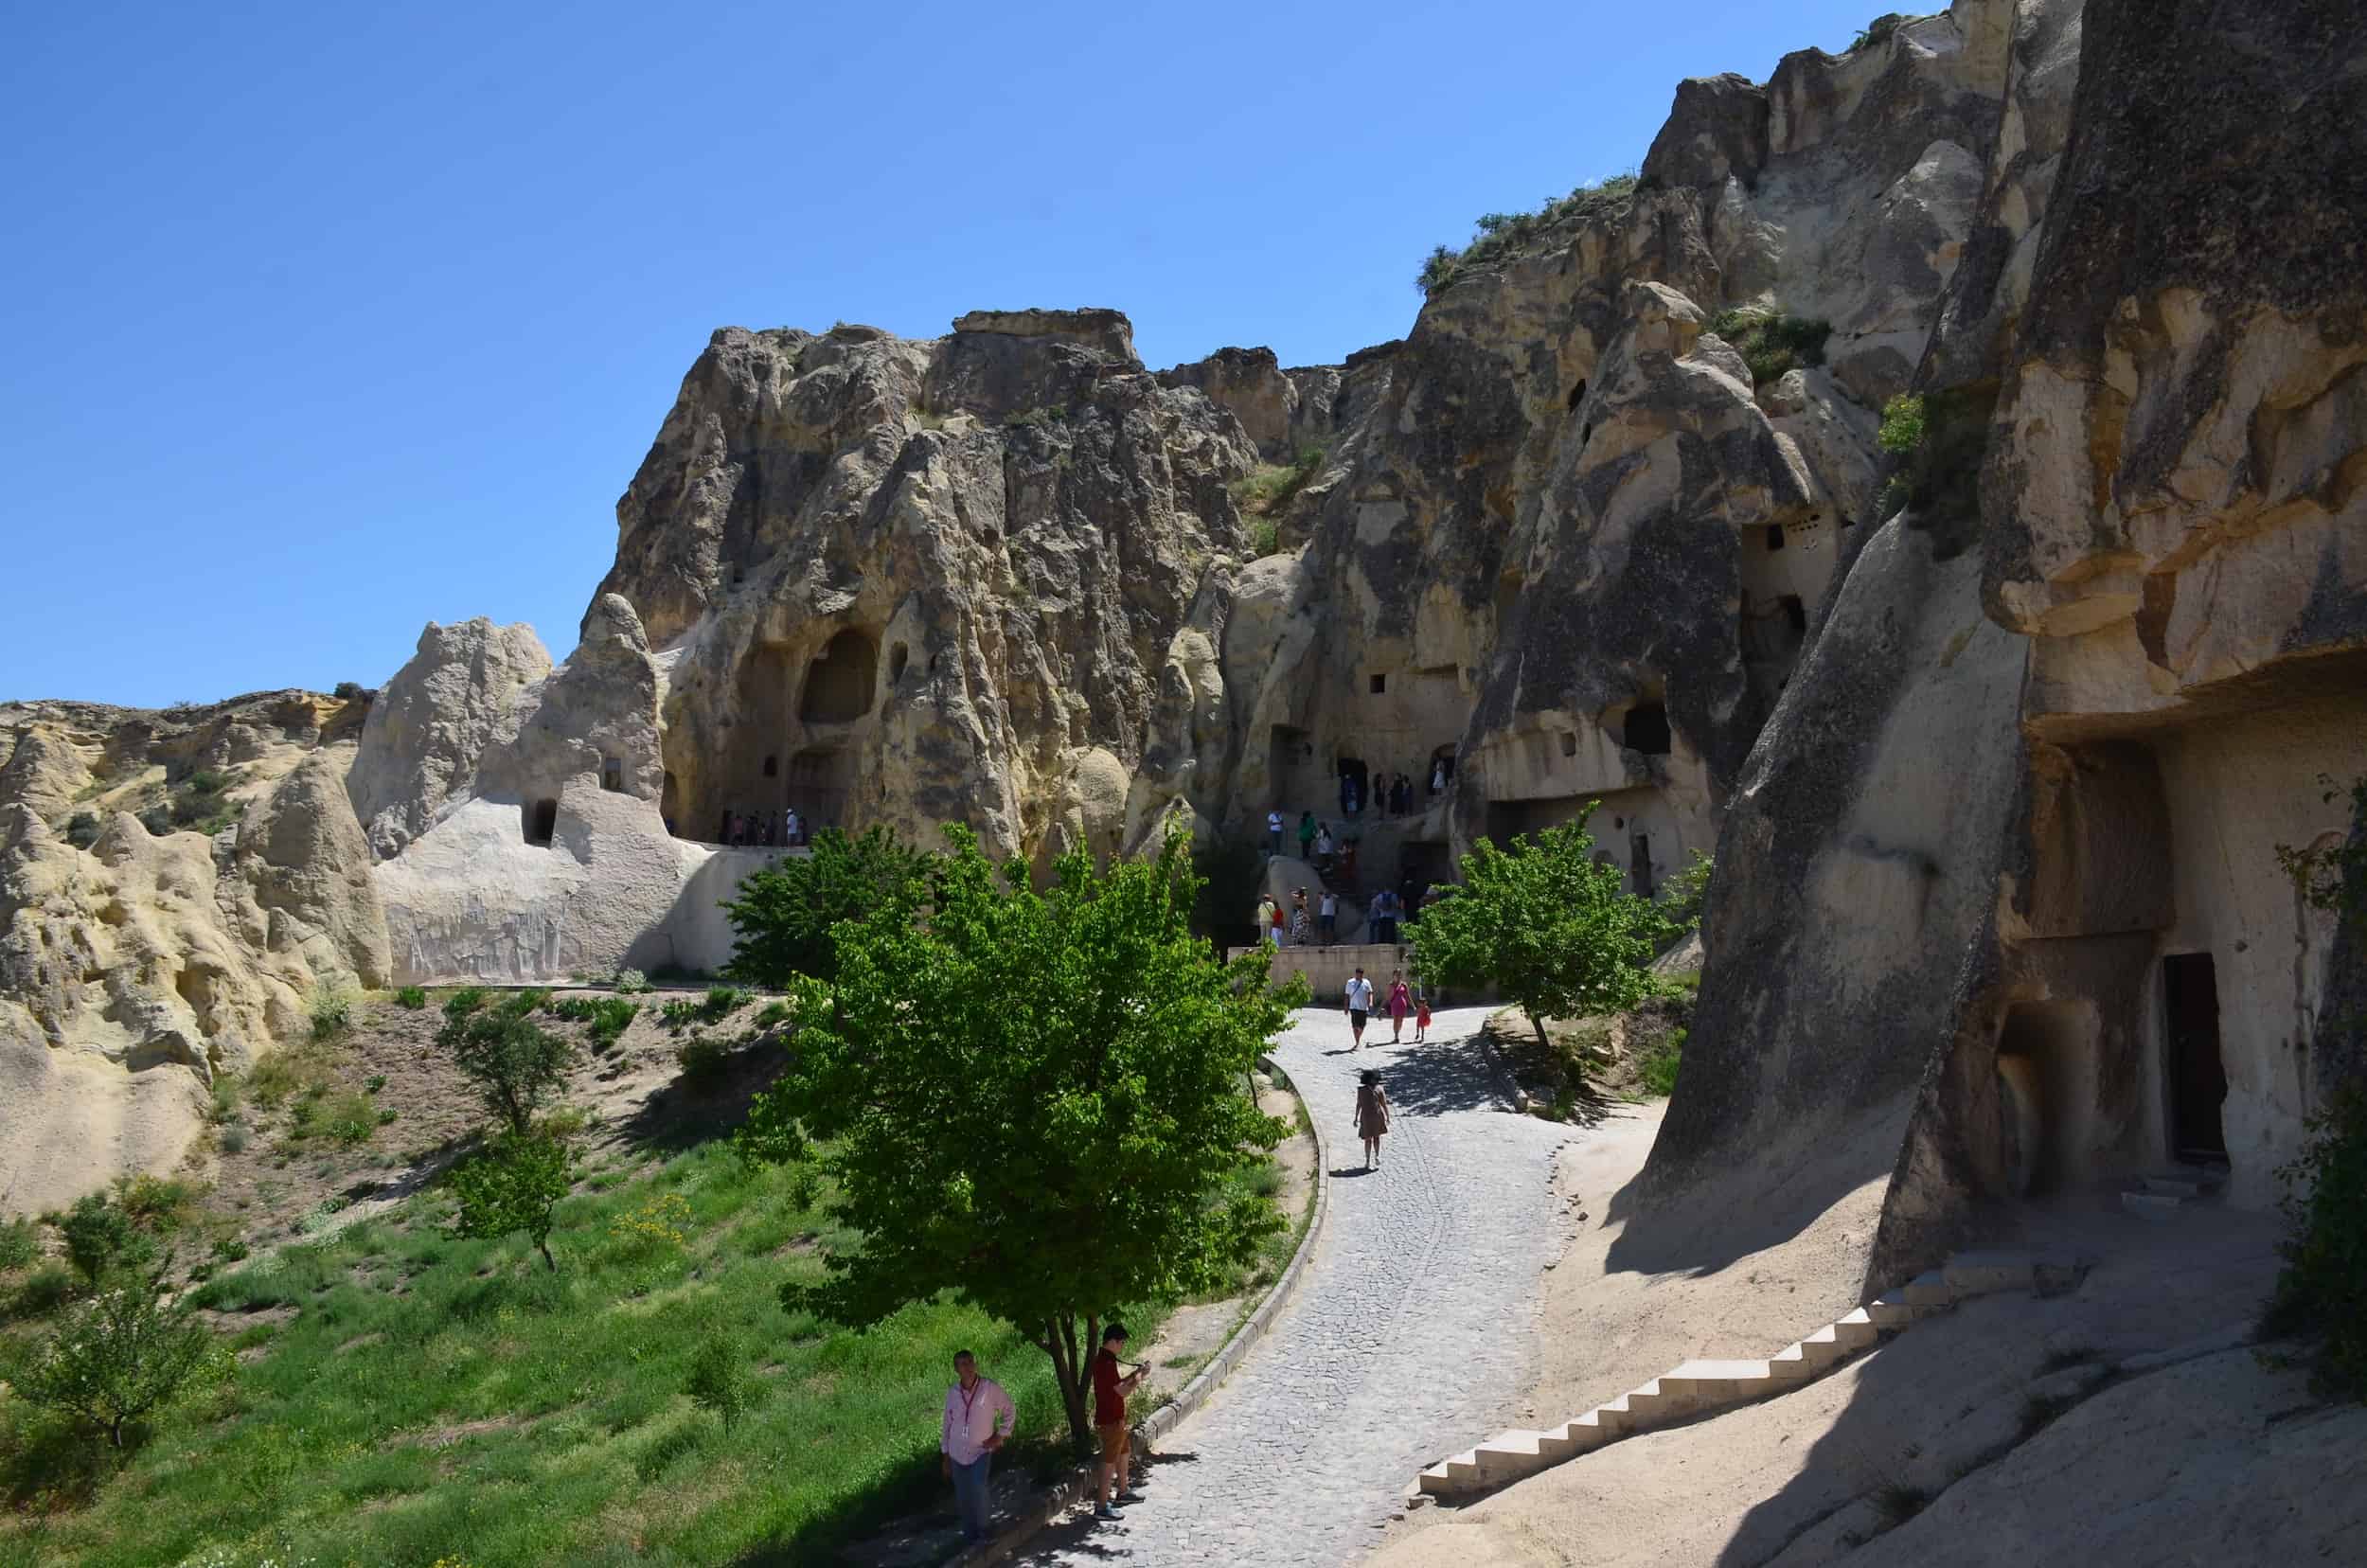 View from the top of the stairs at Göreme Open Air Museum